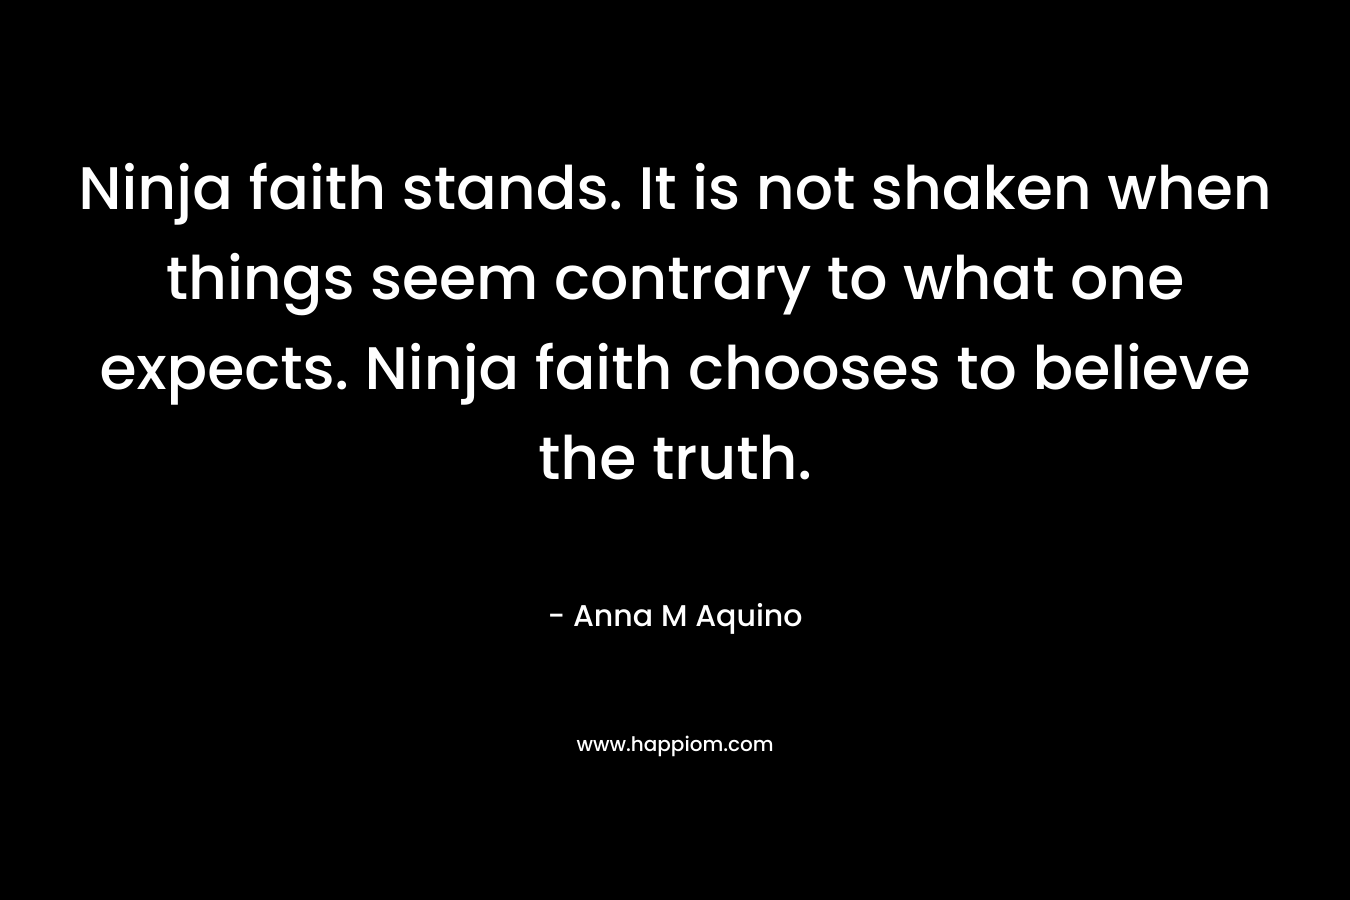 Ninja faith stands. It is not shaken when things seem contrary to what one expects. Ninja faith chooses to believe the truth. – Anna M Aquino